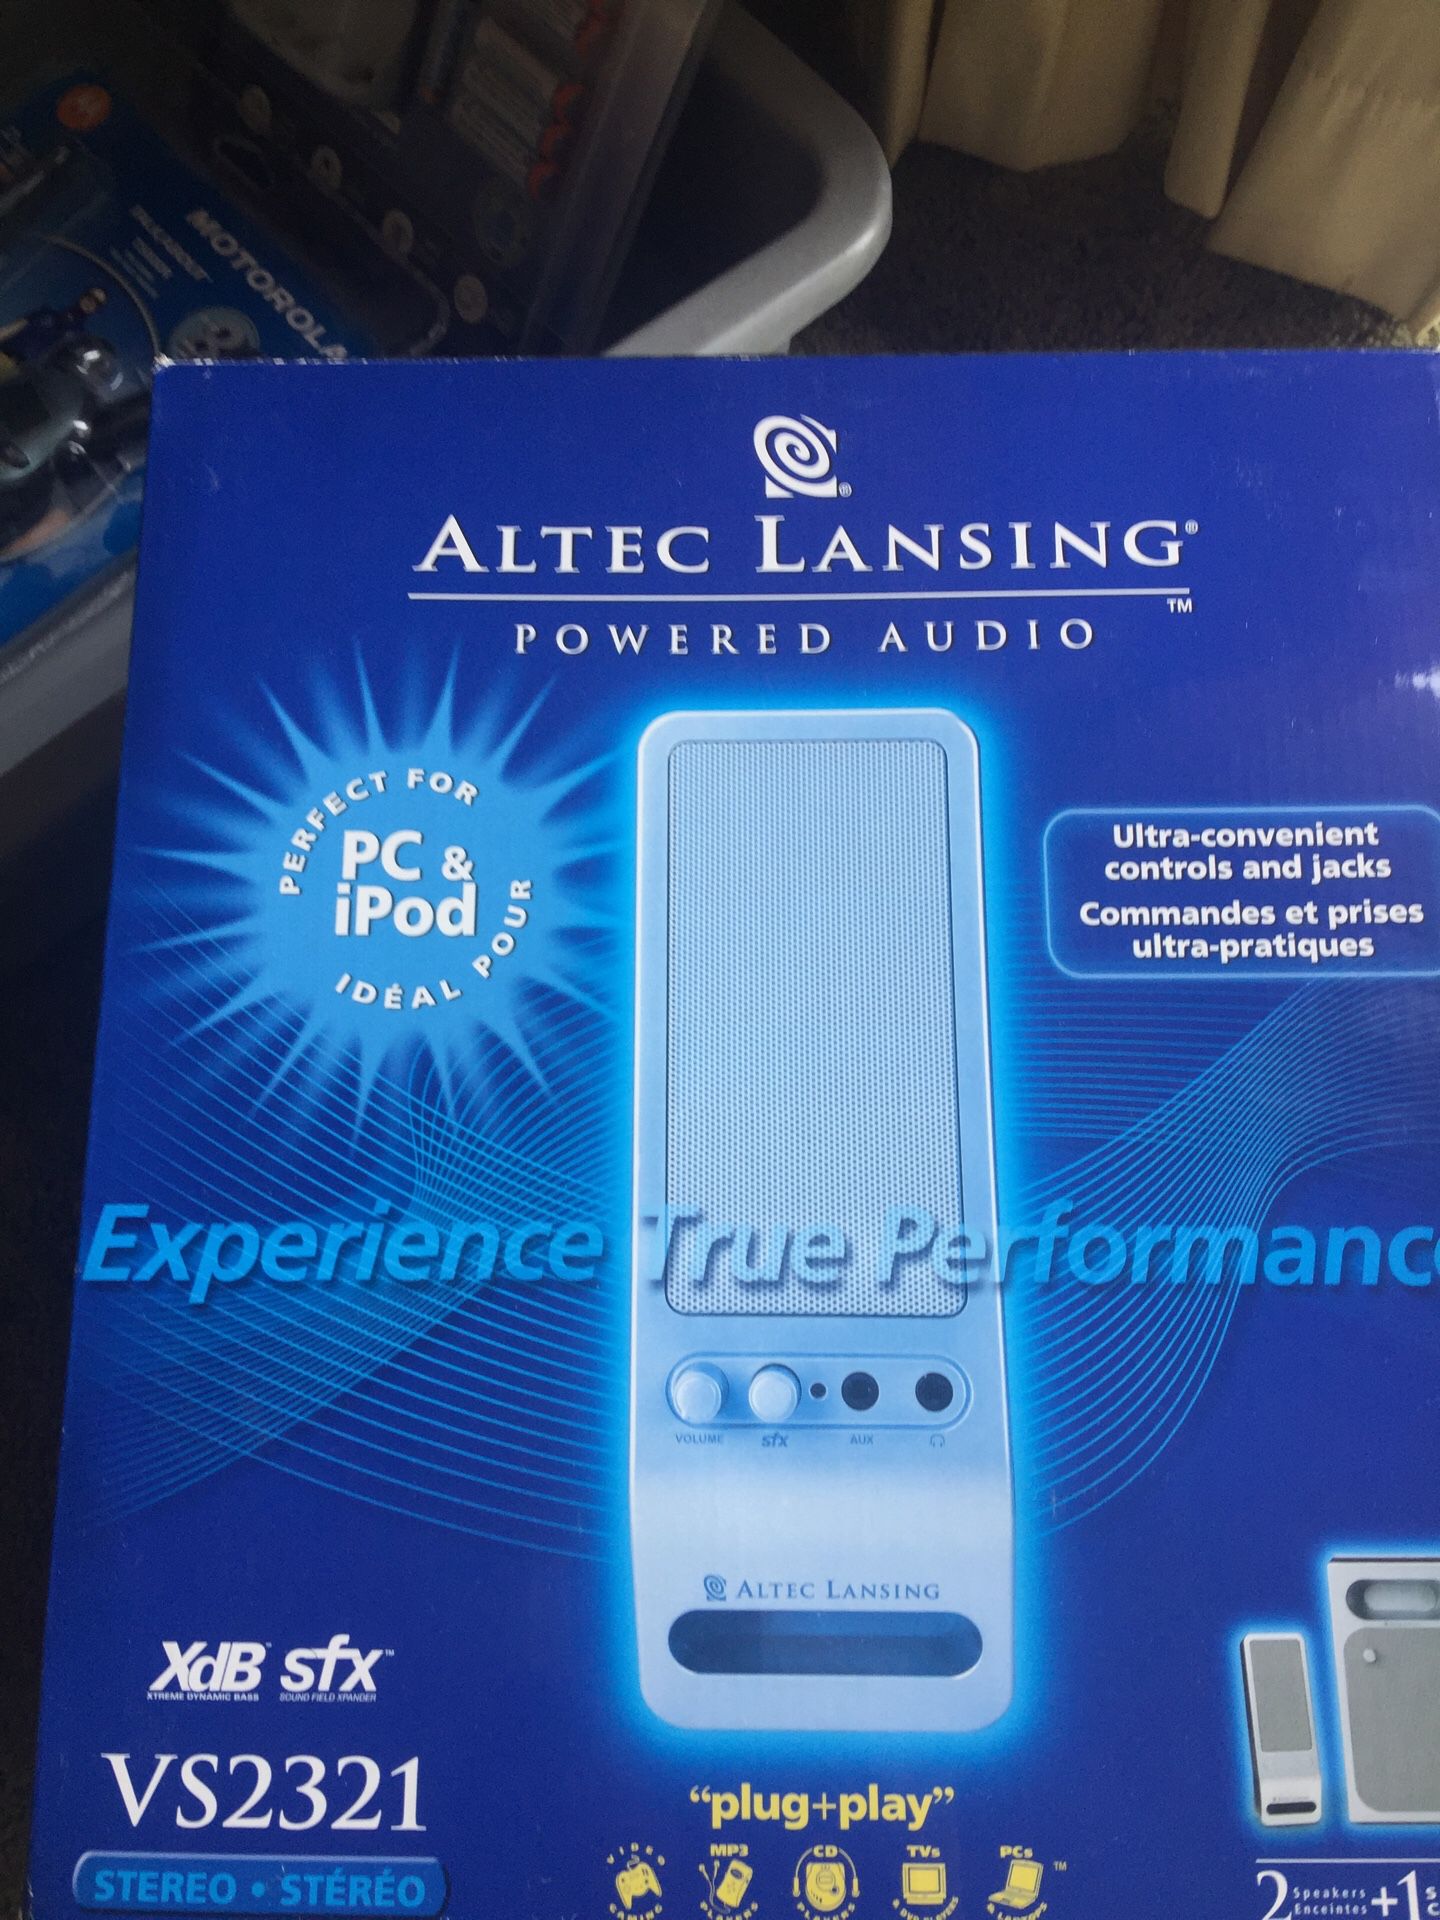 Alter Lansing powered audio. New in Box.